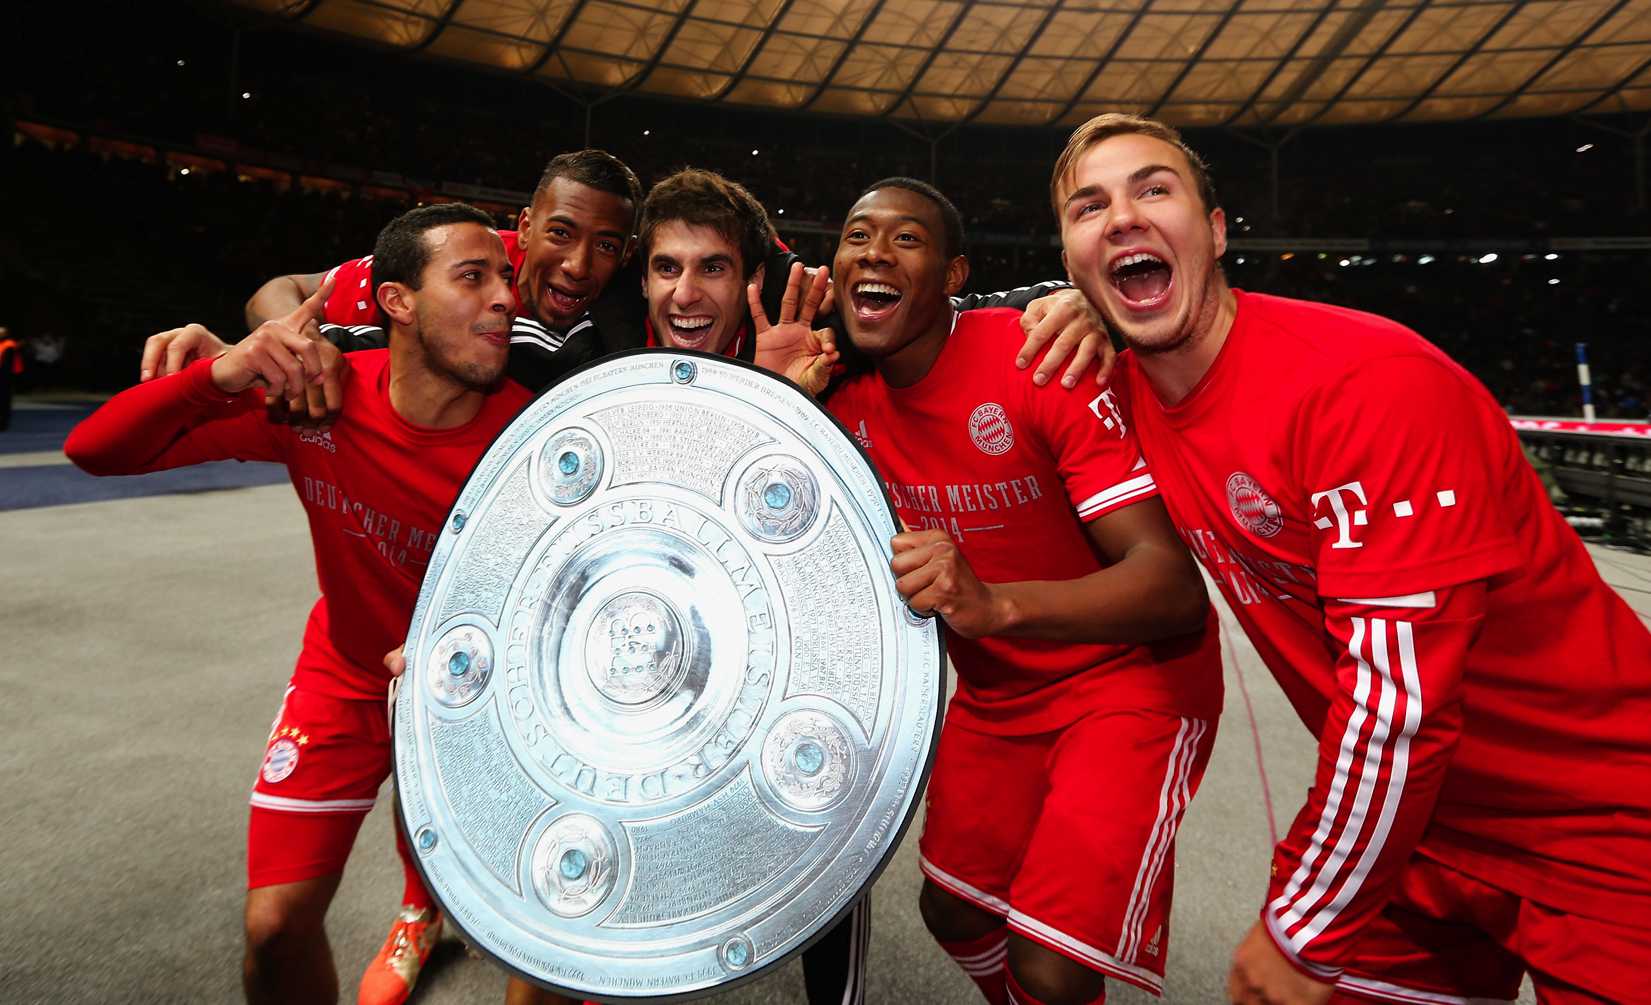 Thiago Alcantara, Jerome Boateng, Javier Martínez Aguinaga, David Alaba and Mario Goetze of Bayern Muenchen celebrate winning the German Championship after the Bundesliga match between Hertha BSC and FC Bayern Muenchen at Olympiastadion on March 25, 2014 in Berlin, Germany. (Boris Streubel—Bongarts / Getty Images)